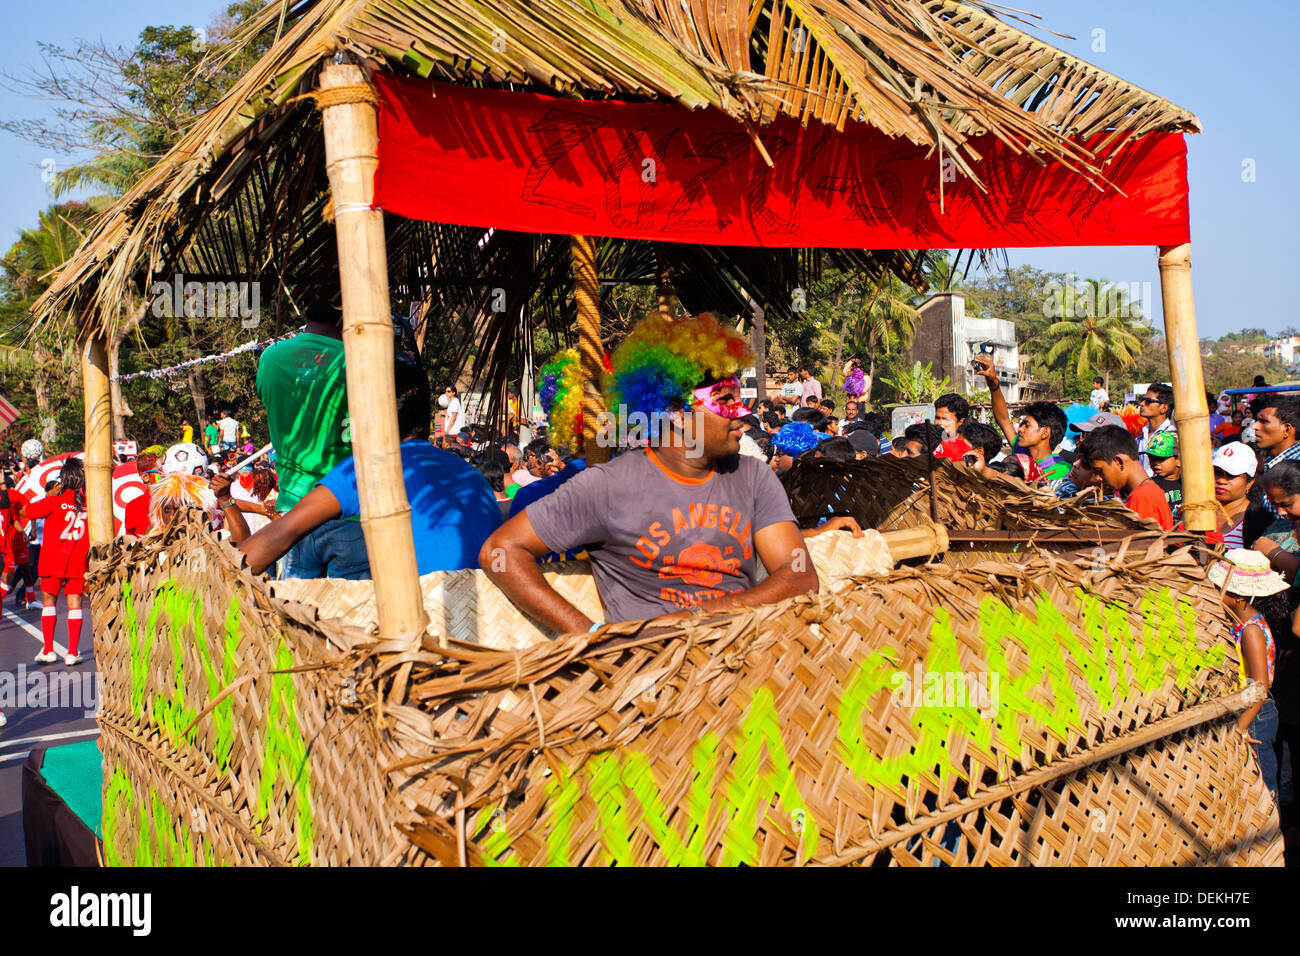 People at traditional procession in a carnival, Goa Carnivals, Goa, India Stock Photo